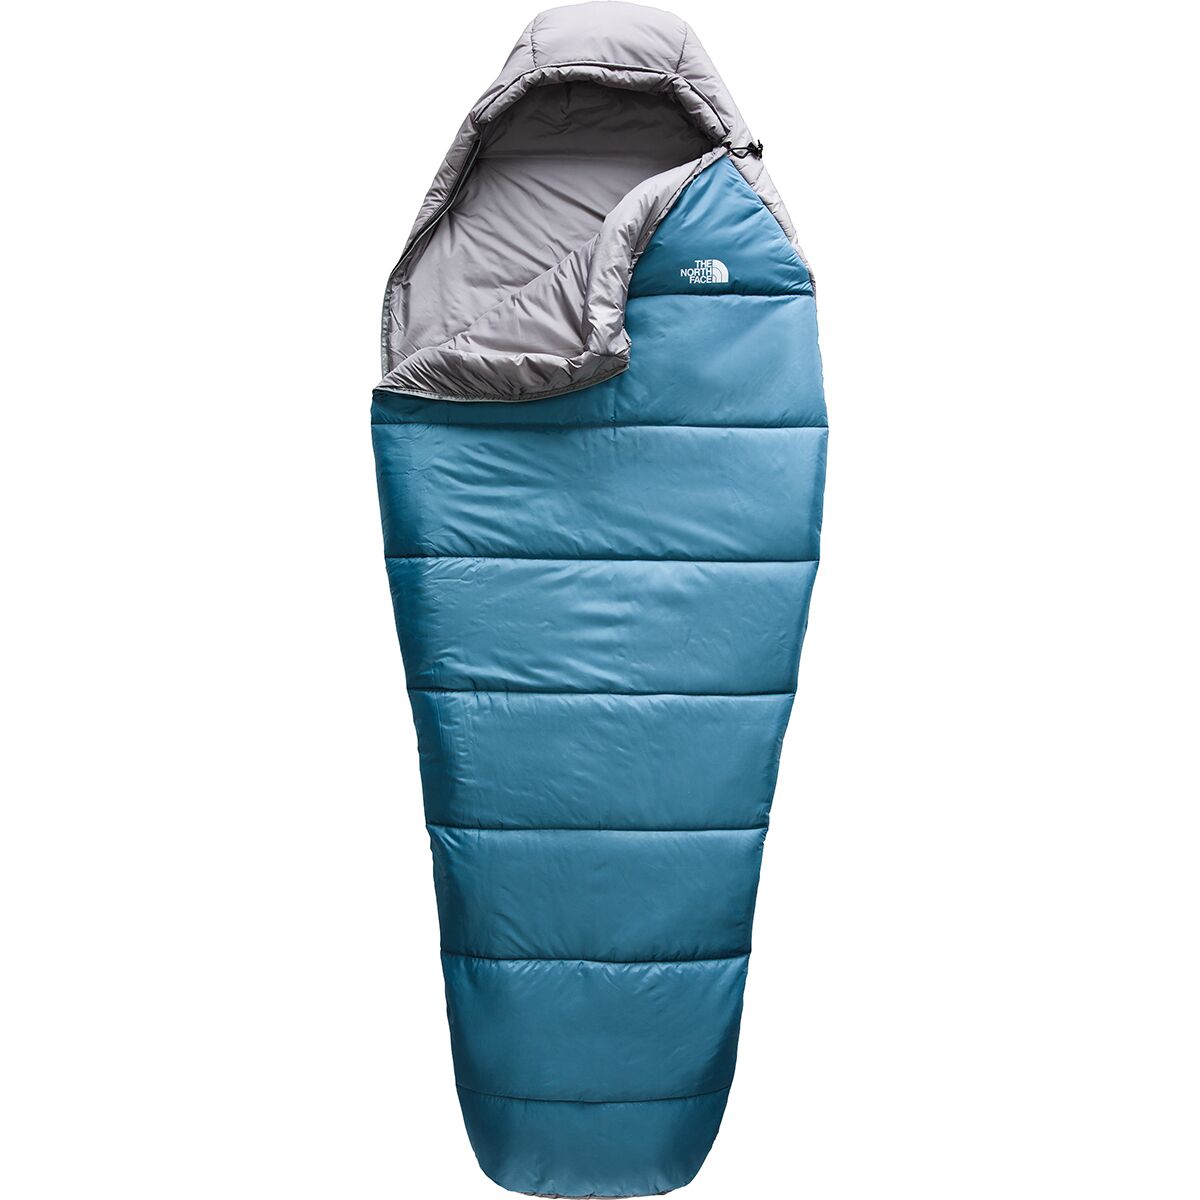 The North Face Wasatch Sleeping Bag: 20F Synthetic